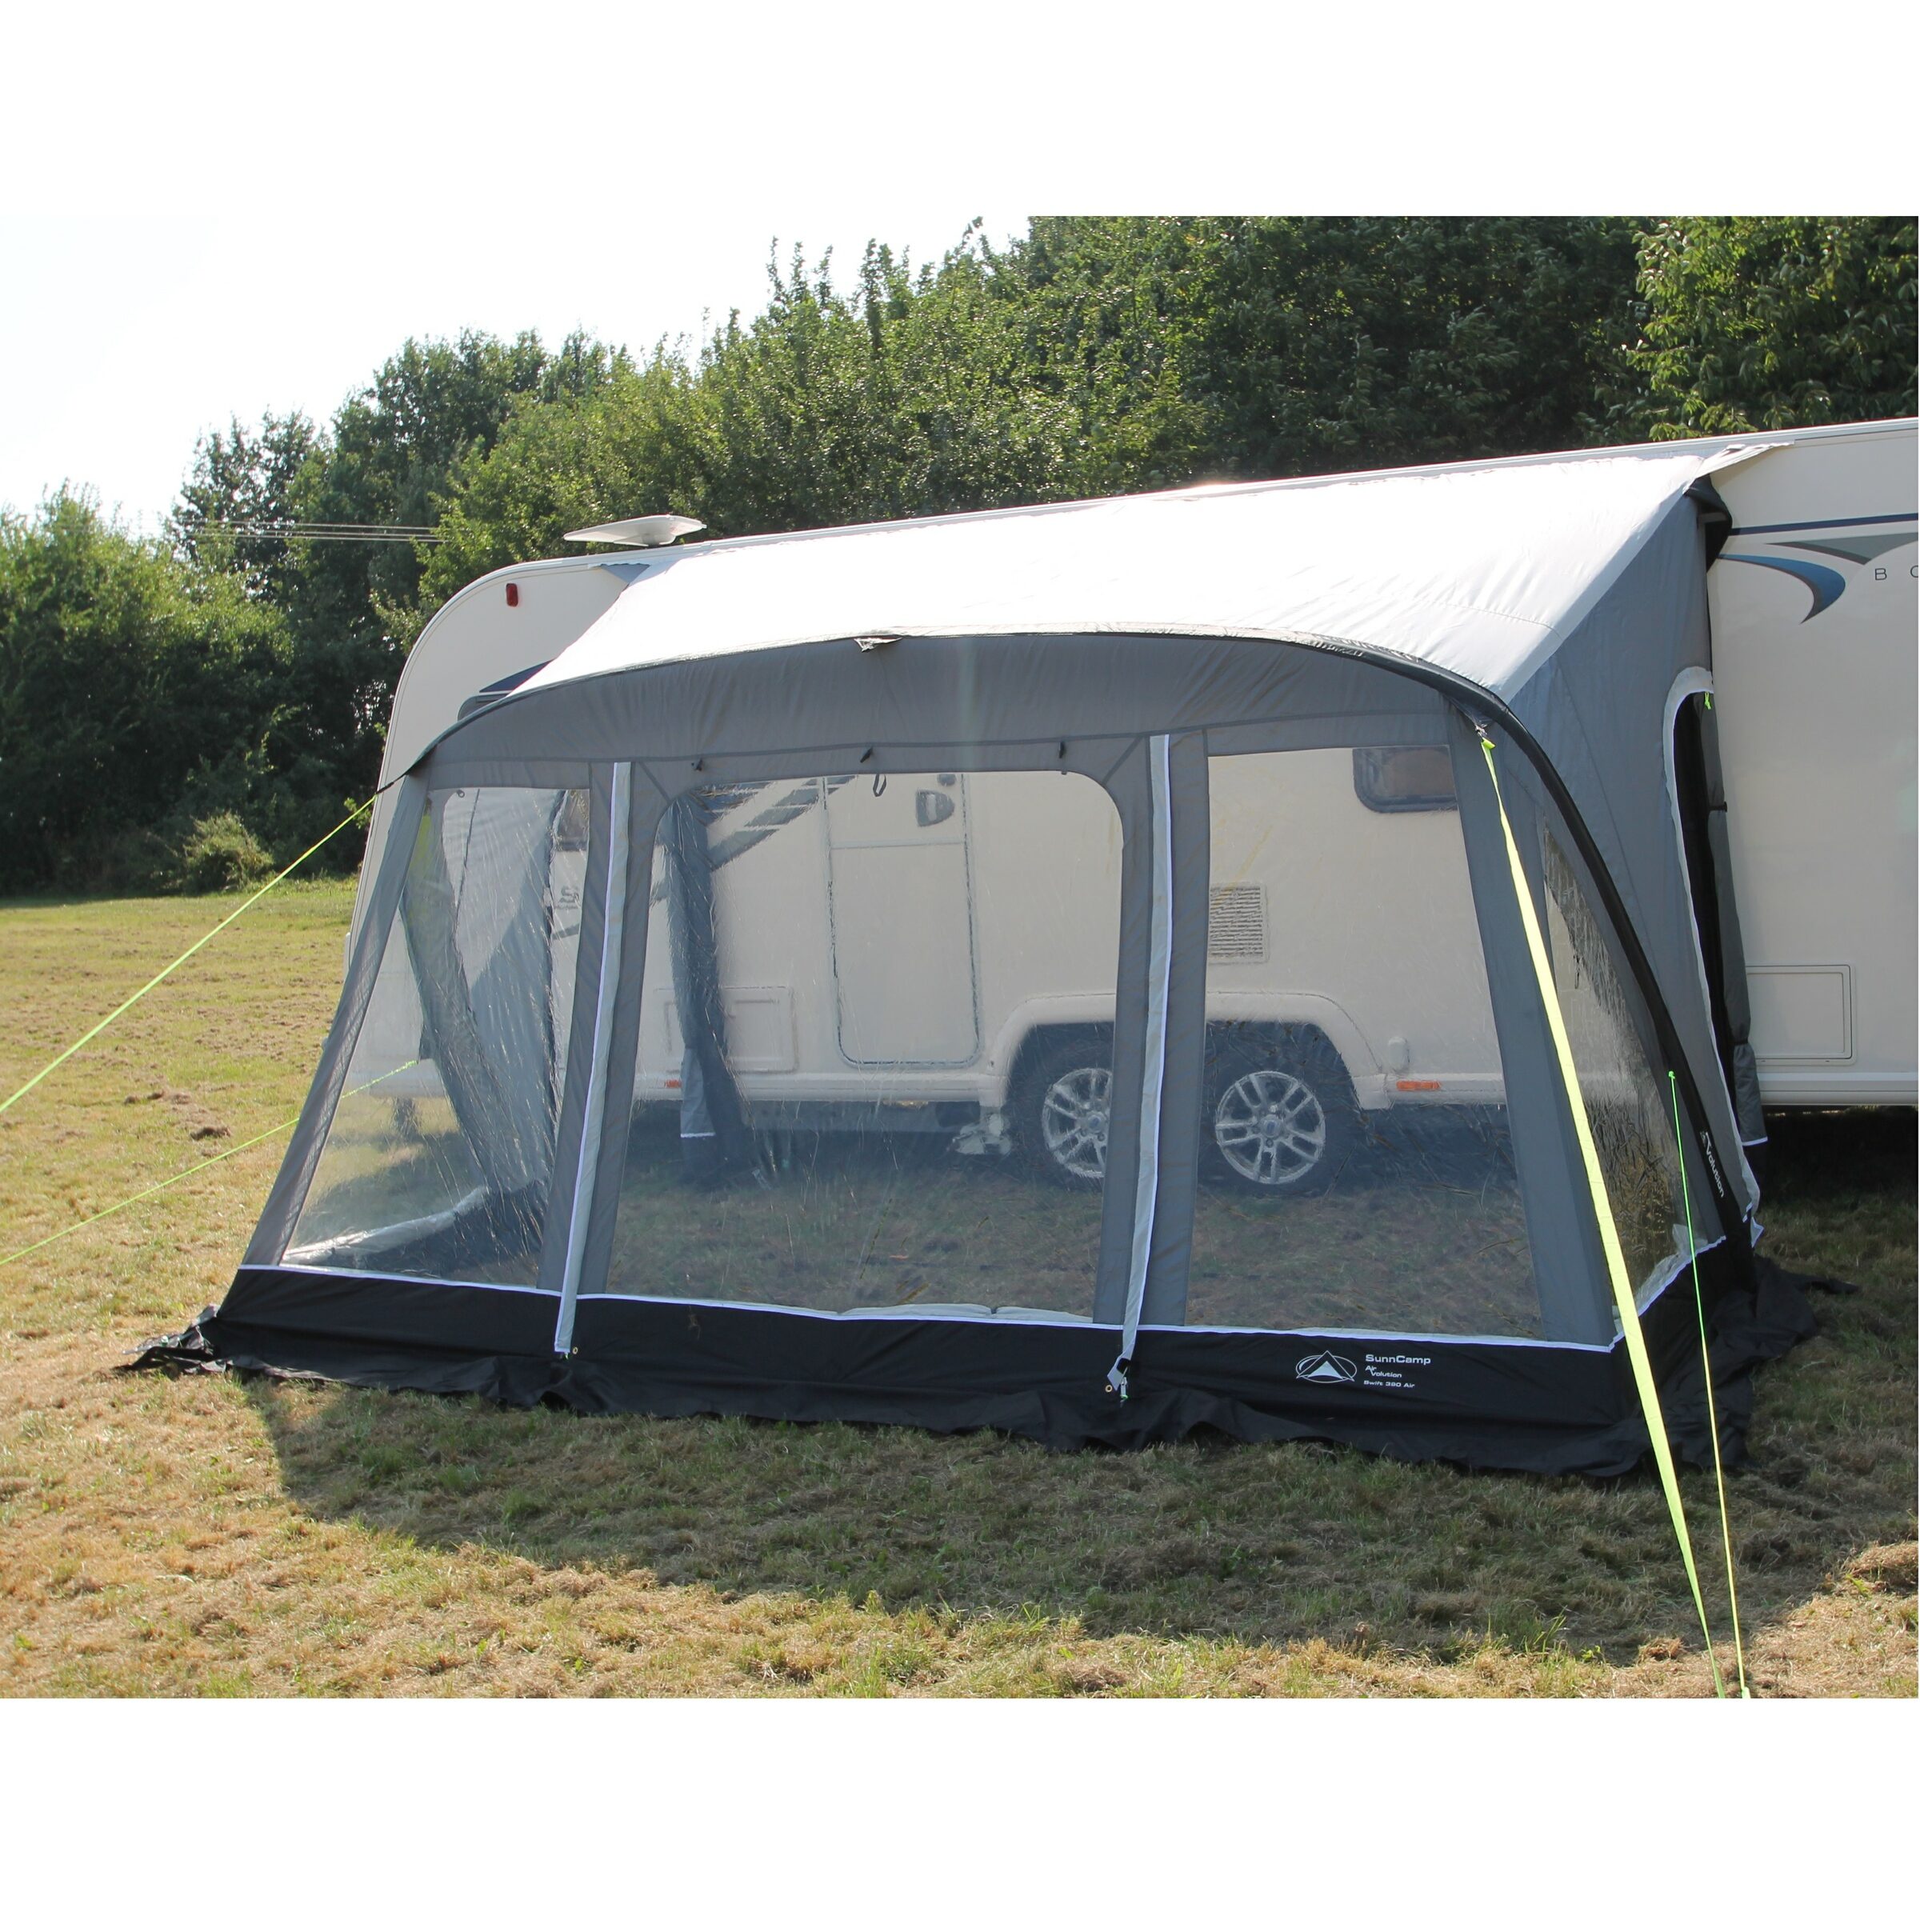 Sunncamp Swift Air 390 Caravan Awning 2018 Free Uprights Norwich